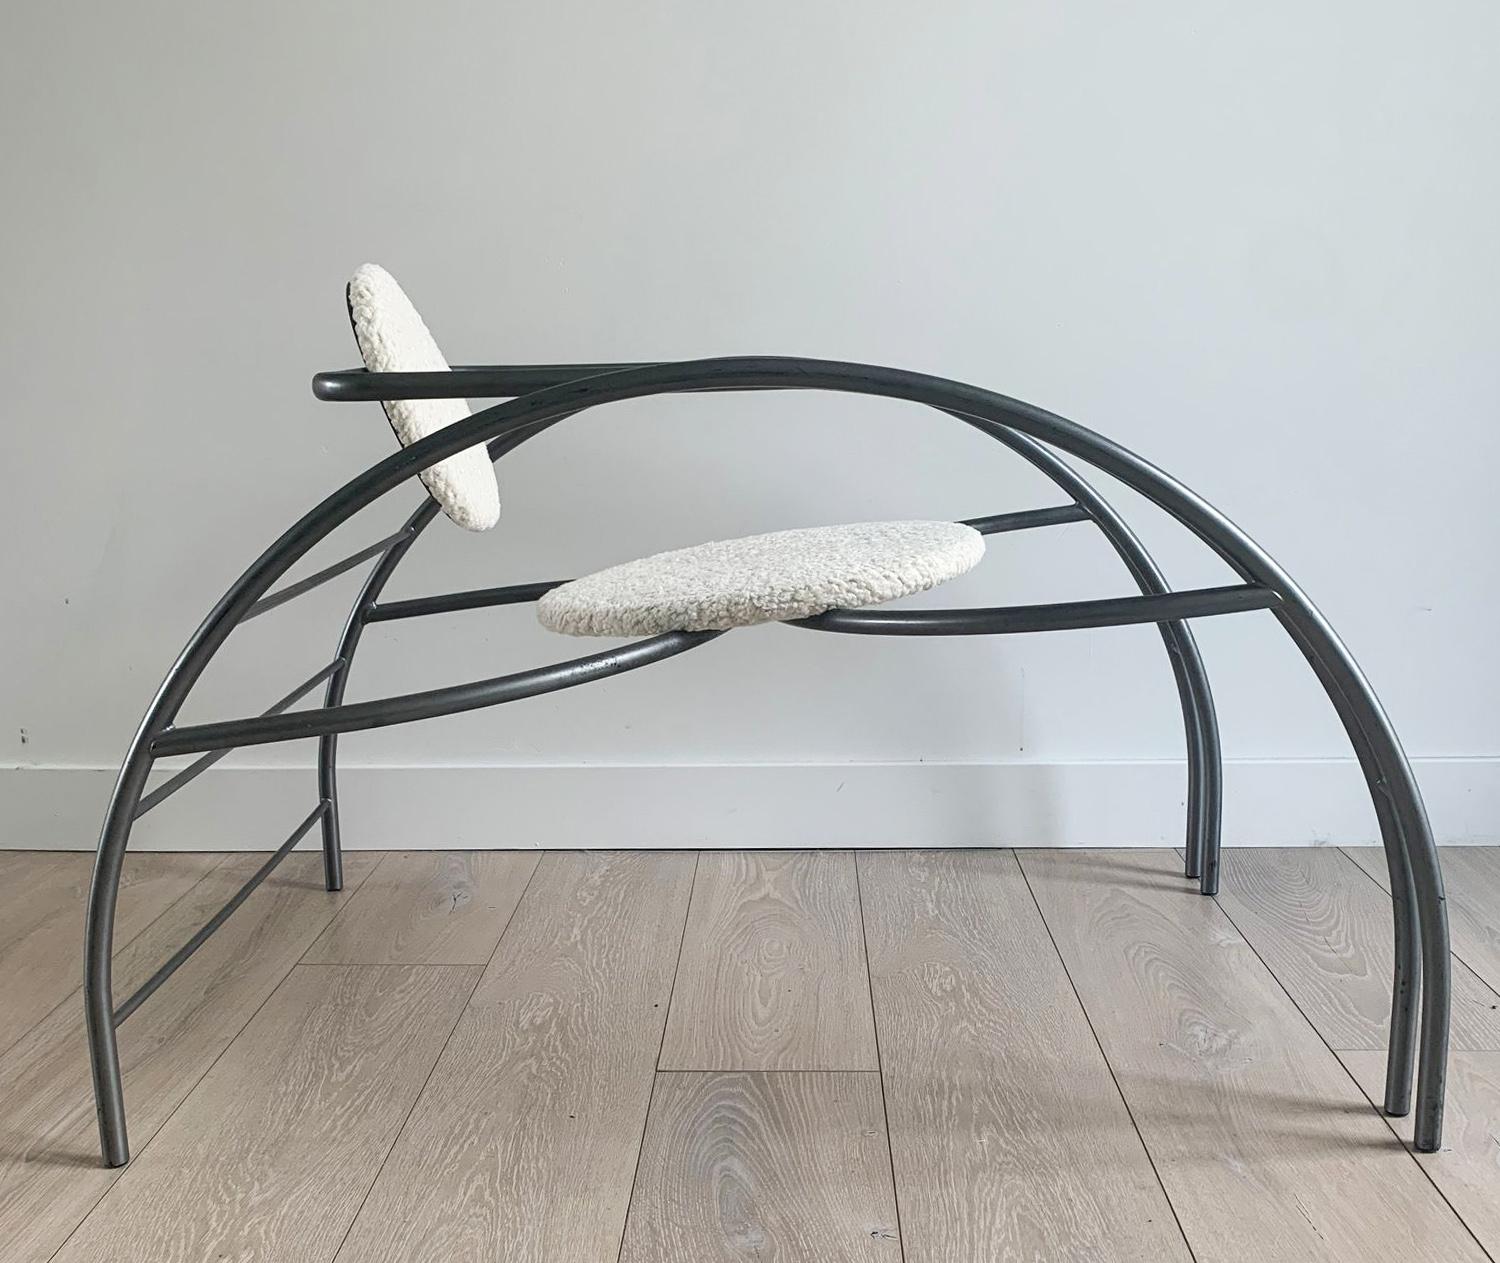 Steel Postmodern Les Amisca Quebec 69 Spider Chair